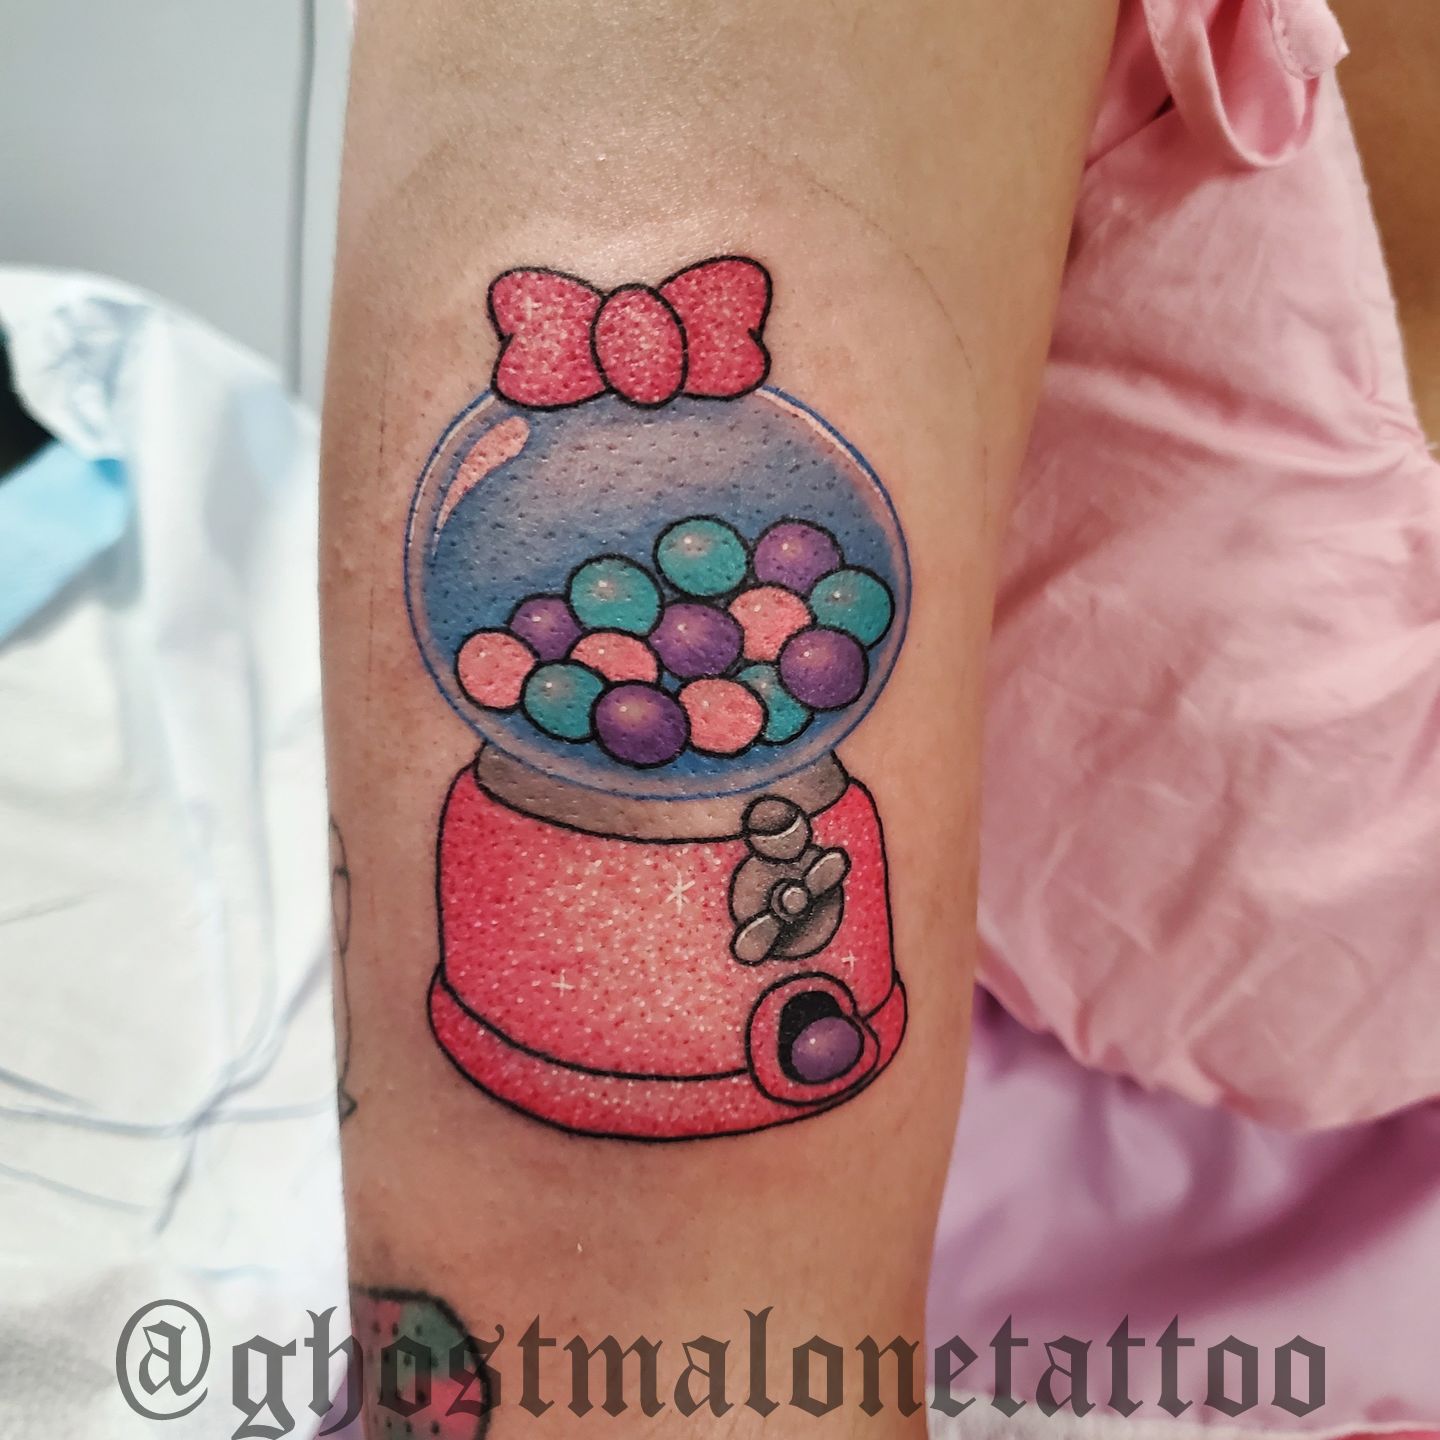 Mean Teeth Tattoo  Sweet lil gumball machine gap filler for  sparkhausvintage  a little fresh a little healed  Check out her shop  inside kavarnacoffeehouse downtown         